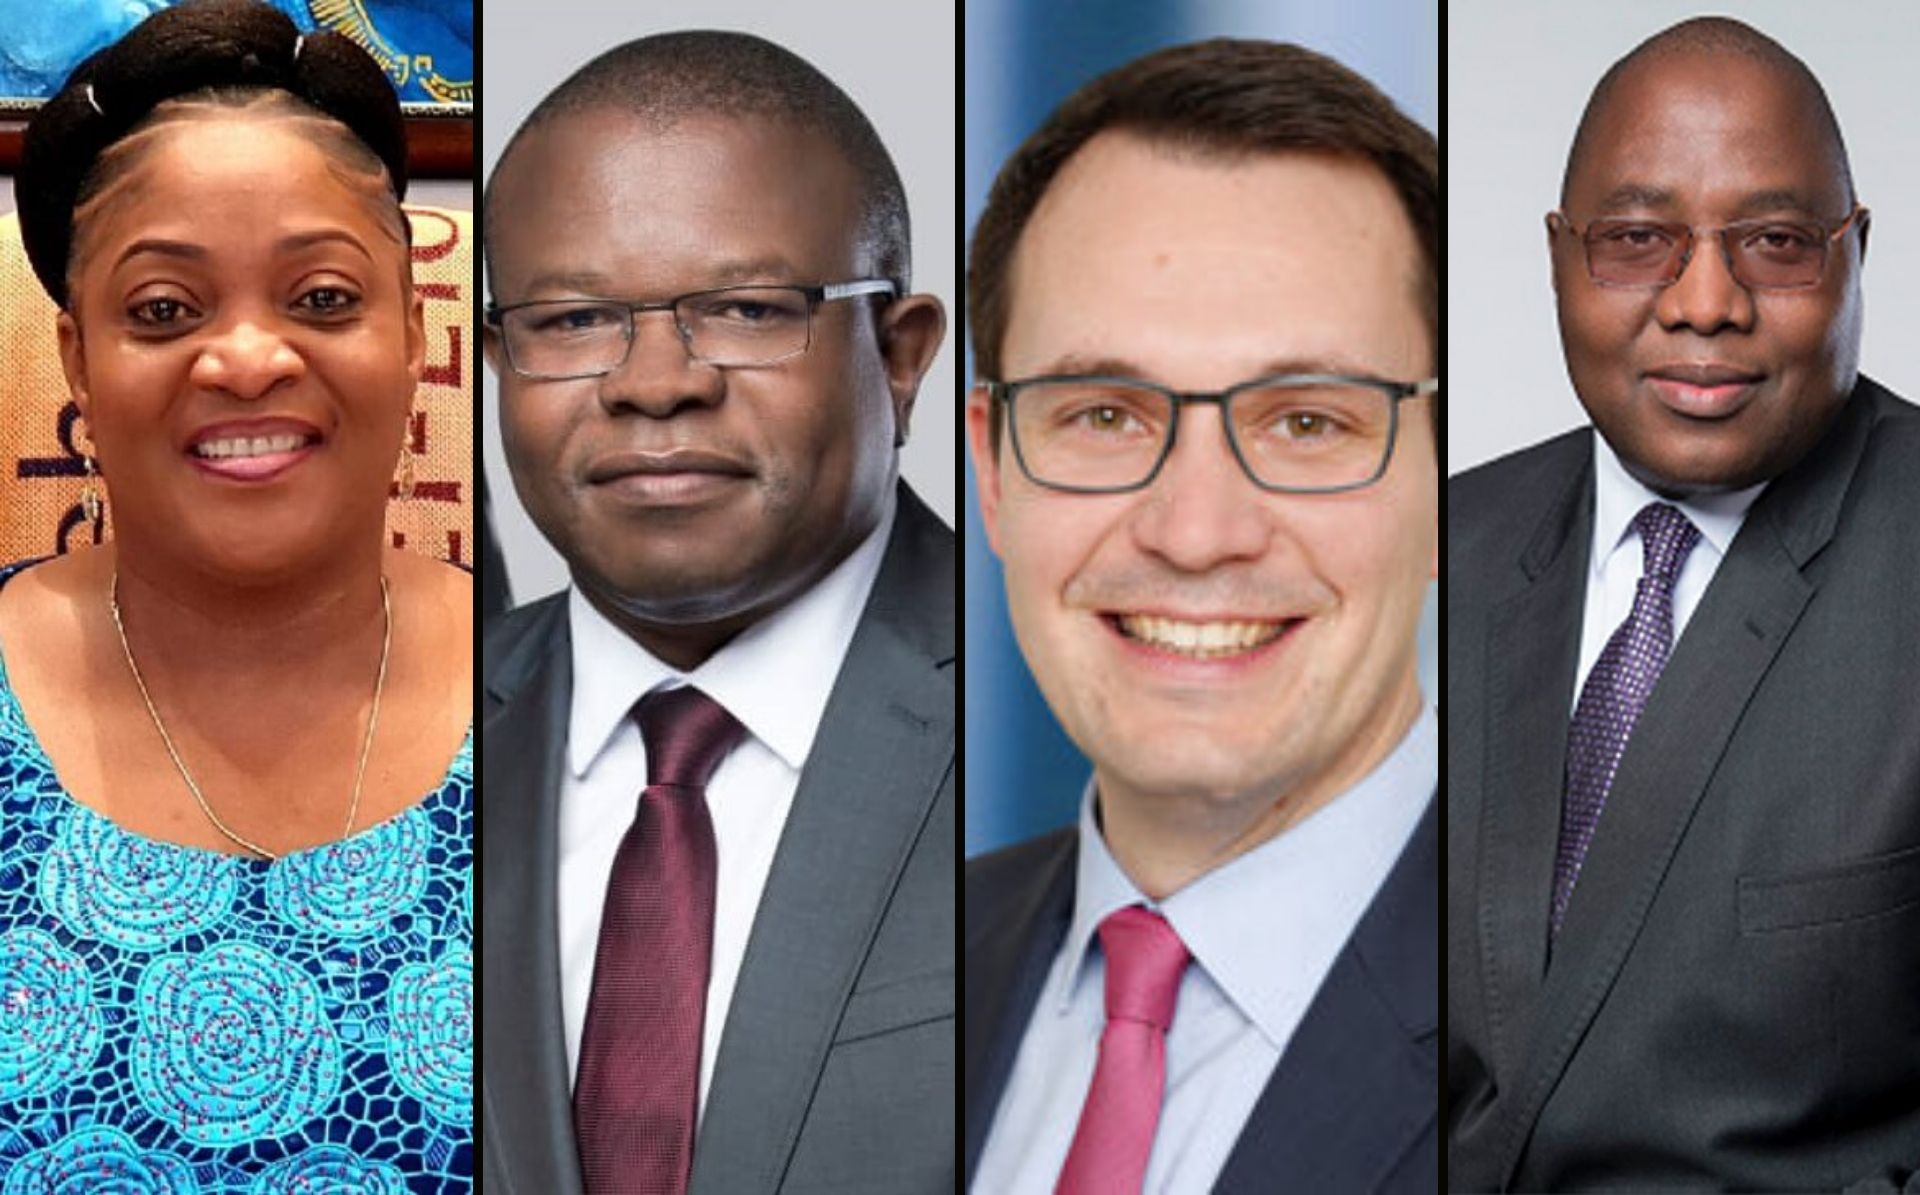 Eswatini Prime Minister, Liberia’s Vice President, others to speak at African Leadership Magazine 2020 Africa Summit 